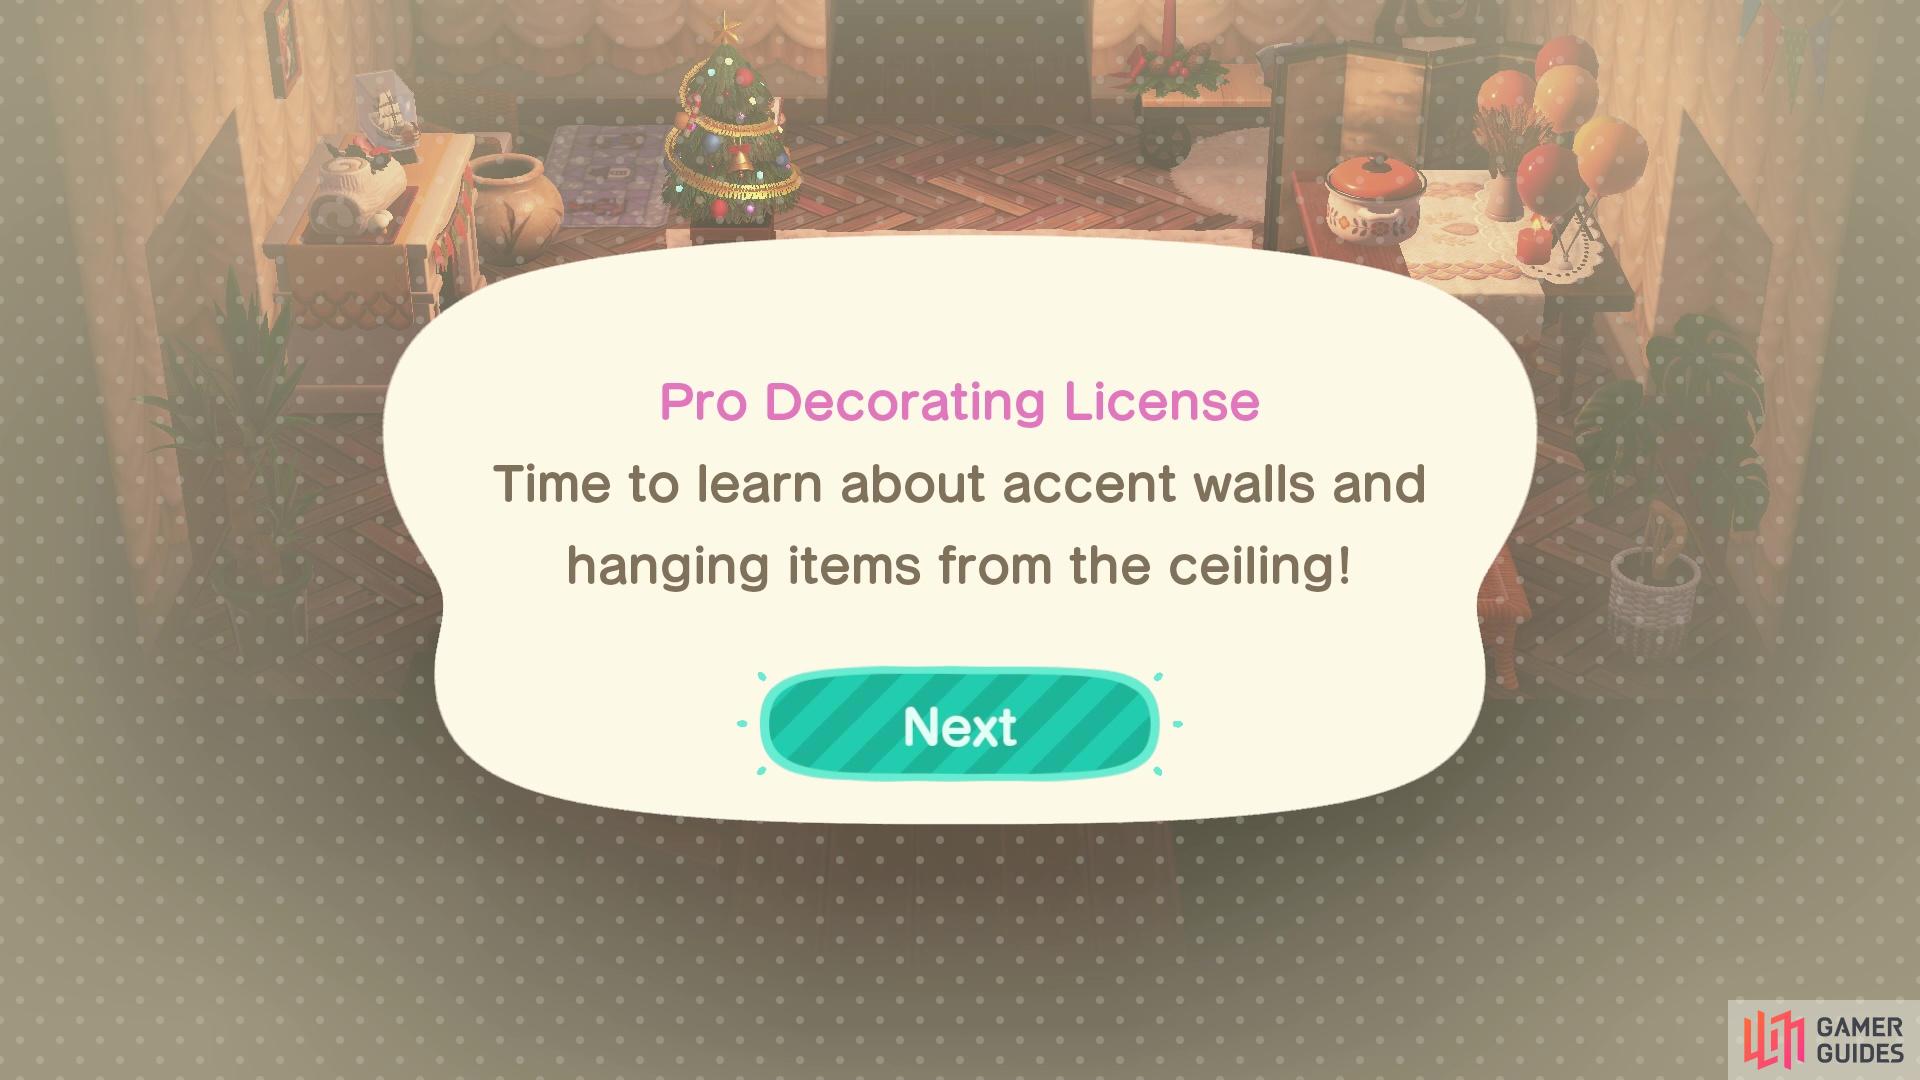 The Pro Decorating License allows you to edit accent walls and hang ceiling fixtures!